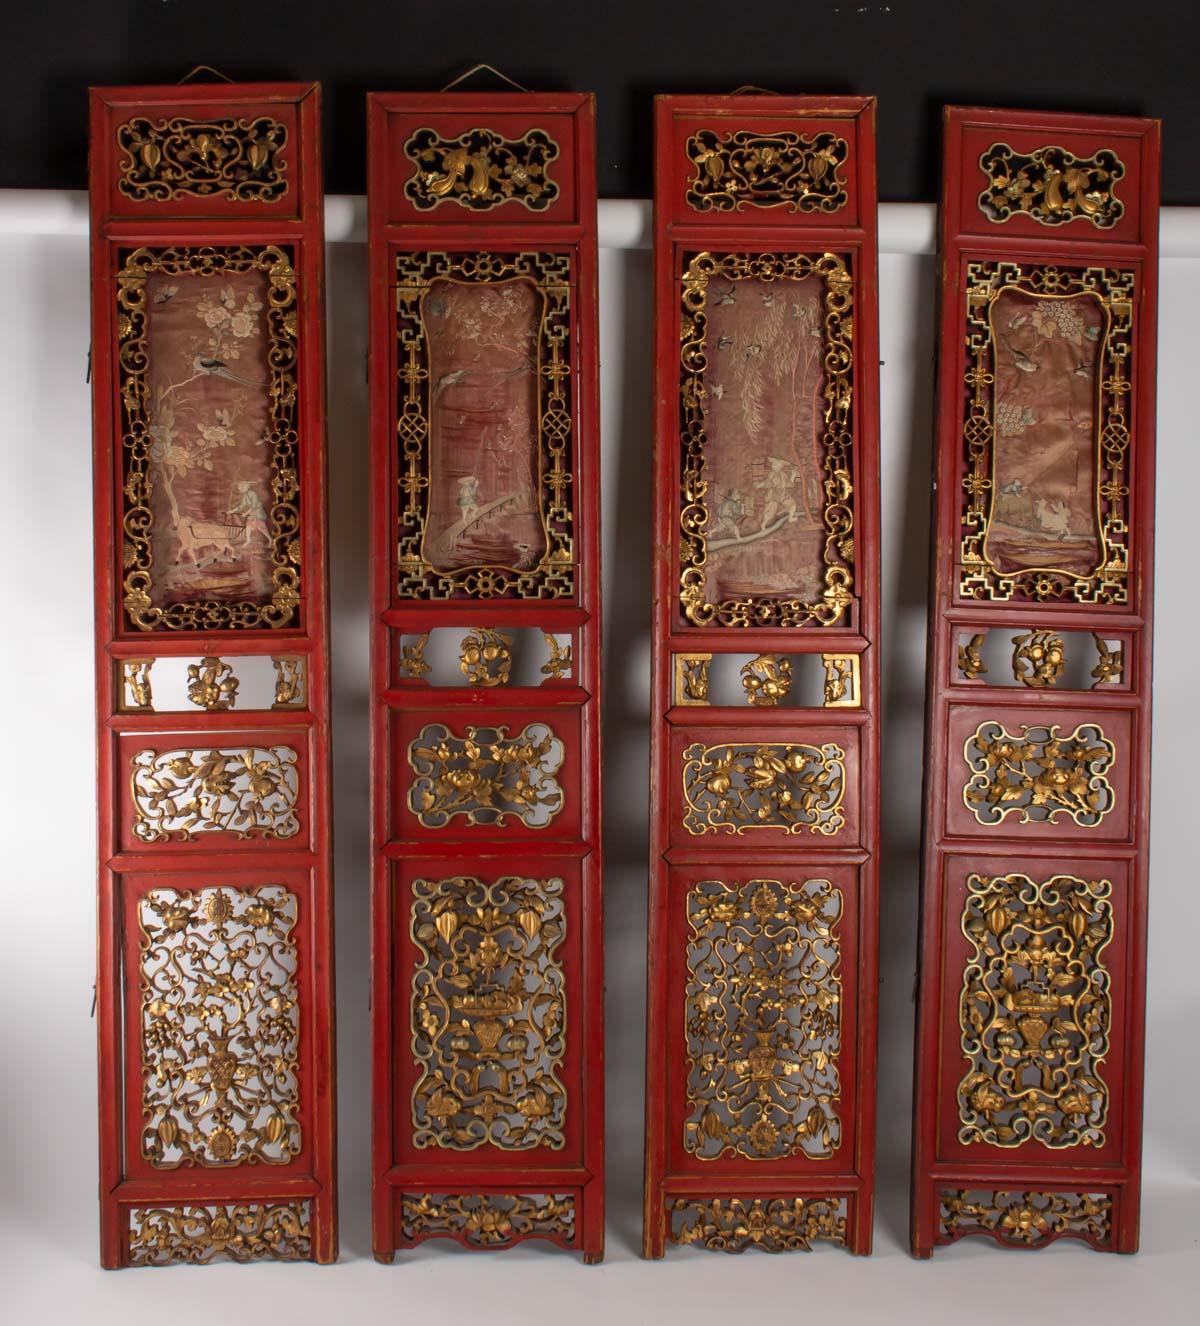 4-panel red and gold wood openwork and carved fruit, flowers and symbols protectors, rocket silk panels, China, 19th century
Measures: H 174cm, W 35cm, W 5cm.